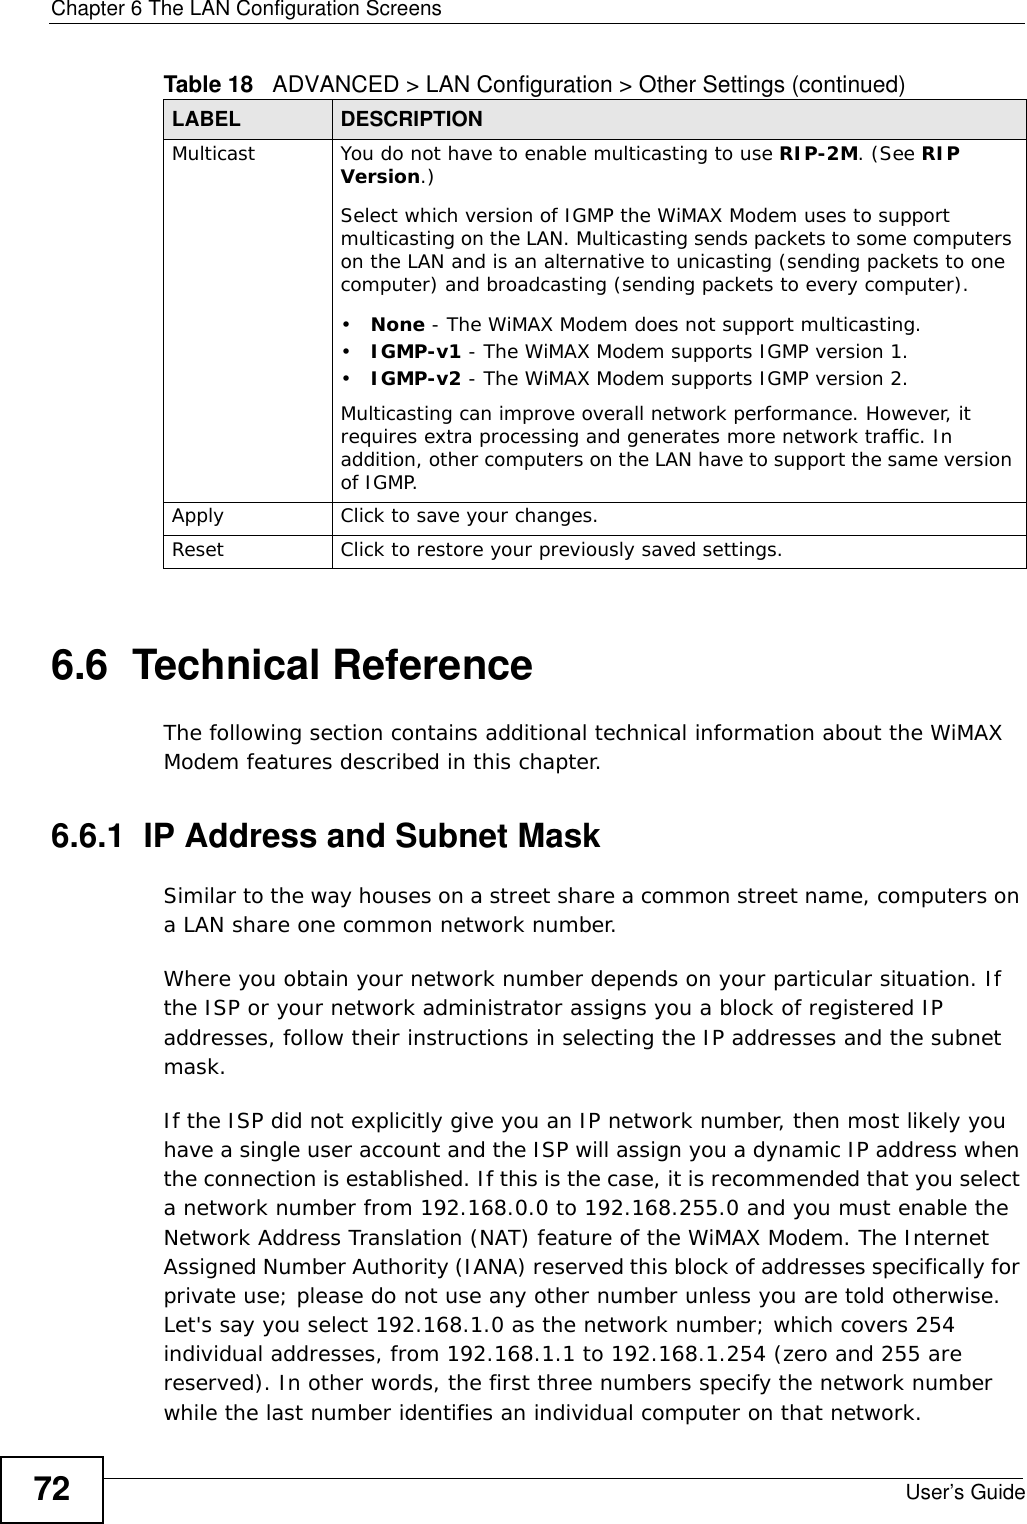 Chapter 6 The LAN Configuration ScreensUser’s Guide726.6  Technical ReferenceThe following section contains additional technical information about the WiMAX Modem features described in this chapter.6.6.1  IP Address and Subnet MaskSimilar to the way houses on a street share a common street name, computers on a LAN share one common network number.Where you obtain your network number depends on your particular situation. If the ISP or your network administrator assigns you a block of registered IP addresses, follow their instructions in selecting the IP addresses and the subnet mask.If the ISP did not explicitly give you an IP network number, then most likely you have a single user account and the ISP will assign you a dynamic IP address when the connection is established. If this is the case, it is recommended that you select a network number from 192.168.0.0 to 192.168.255.0 and you must enable the Network Address Translation (NAT) feature of the WiMAX Modem. The Internet Assigned Number Authority (IANA) reserved this block of addresses specifically for private use; please do not use any other number unless you are told otherwise. Let&apos;s say you select 192.168.1.0 as the network number; which covers 254 individual addresses, from 192.168.1.1 to 192.168.1.254 (zero and 255 are reserved). In other words, the first three numbers specify the network number while the last number identifies an individual computer on that network.Multicast You do not have to enable multicasting to use RIP-2M. (See RIP Version.)Select which version of IGMP the WiMAX Modem uses to support multicasting on the LAN. Multicasting sends packets to some computers on the LAN and is an alternative to unicasting (sending packets to one computer) and broadcasting (sending packets to every computer).•None - The WiMAX Modem does not support multicasting.•IGMP-v1 - The WiMAX Modem supports IGMP version 1.•IGMP-v2 - The WiMAX Modem supports IGMP version 2.Multicasting can improve overall network performance. However, it requires extra processing and generates more network traffic. In addition, other computers on the LAN have to support the same version of IGMP.Apply Click to save your changes.Reset Click to restore your previously saved settings.Table 18   ADVANCED &gt; LAN Configuration &gt; Other Settings (continued)LABEL DESCRIPTION